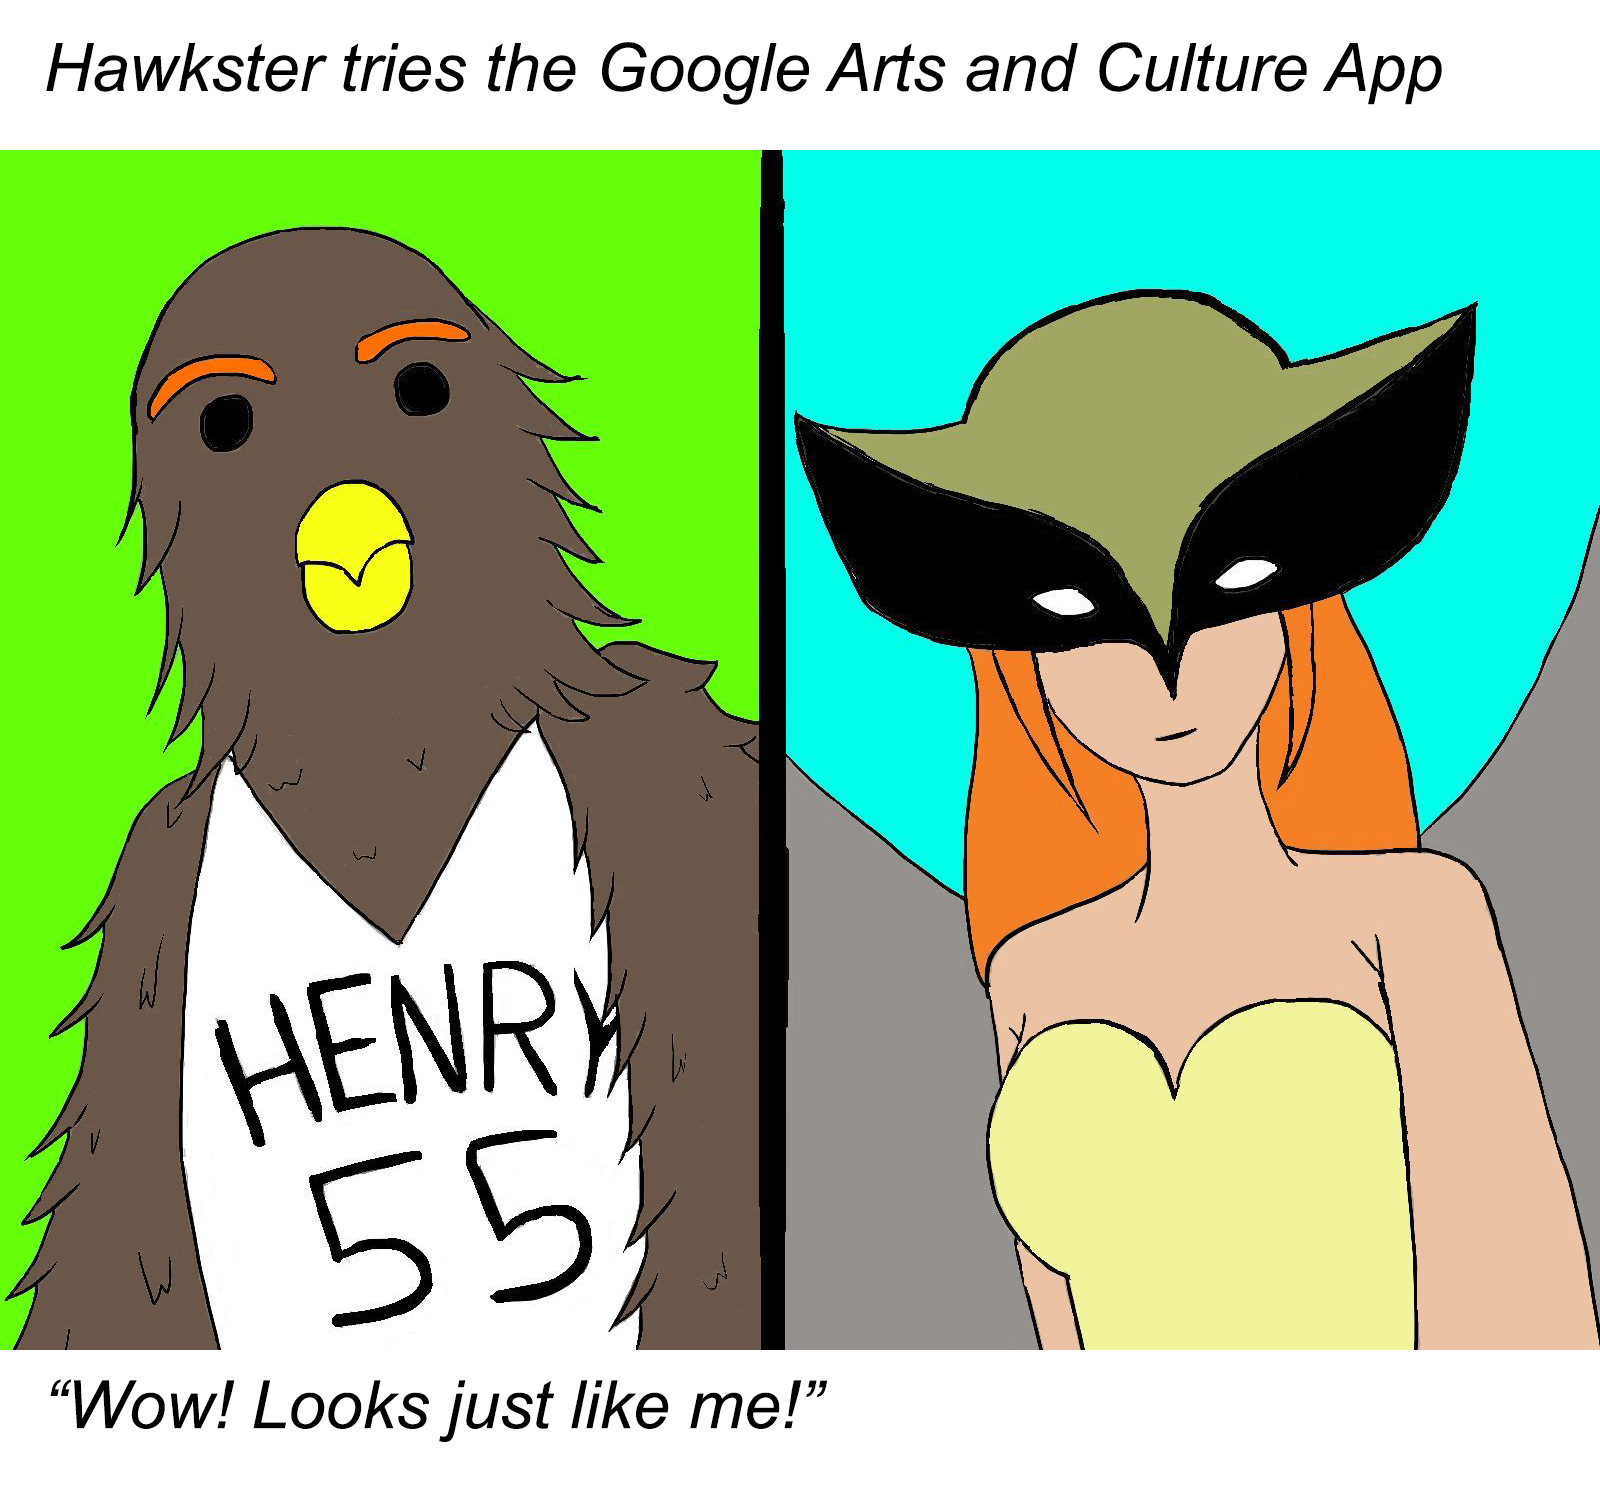 Comic of Hawkster using new Google arts and culture app